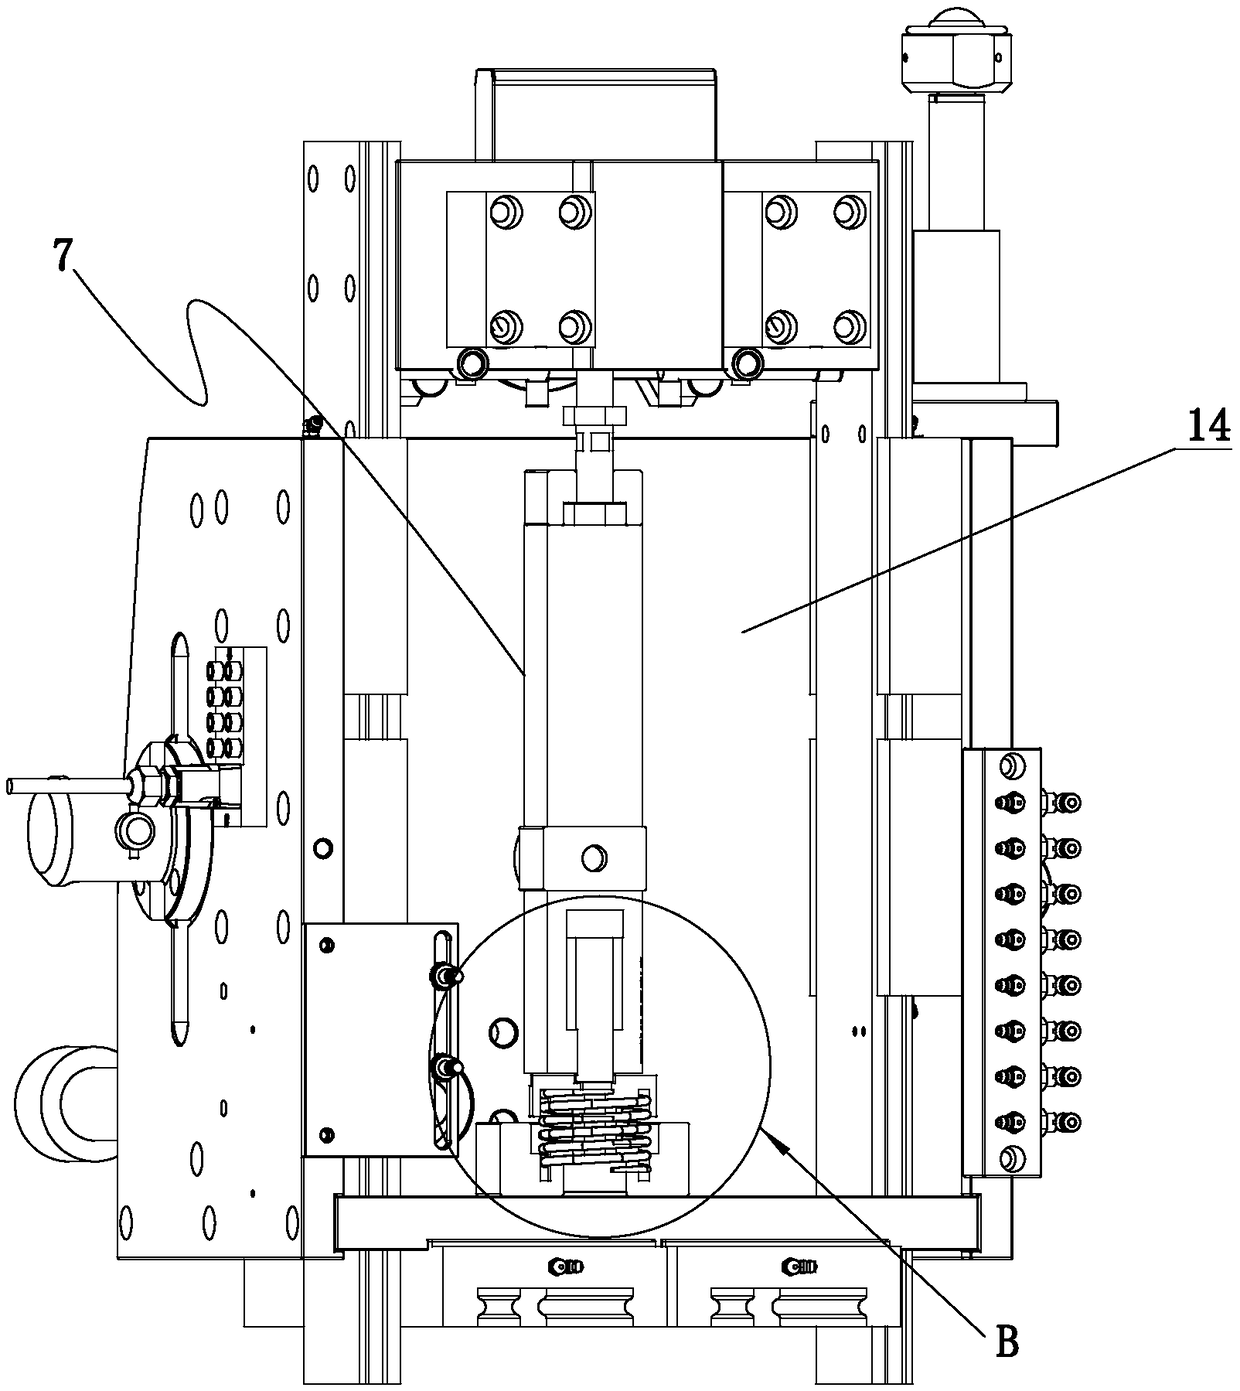 Blowing needle base mechanism for blow molding die